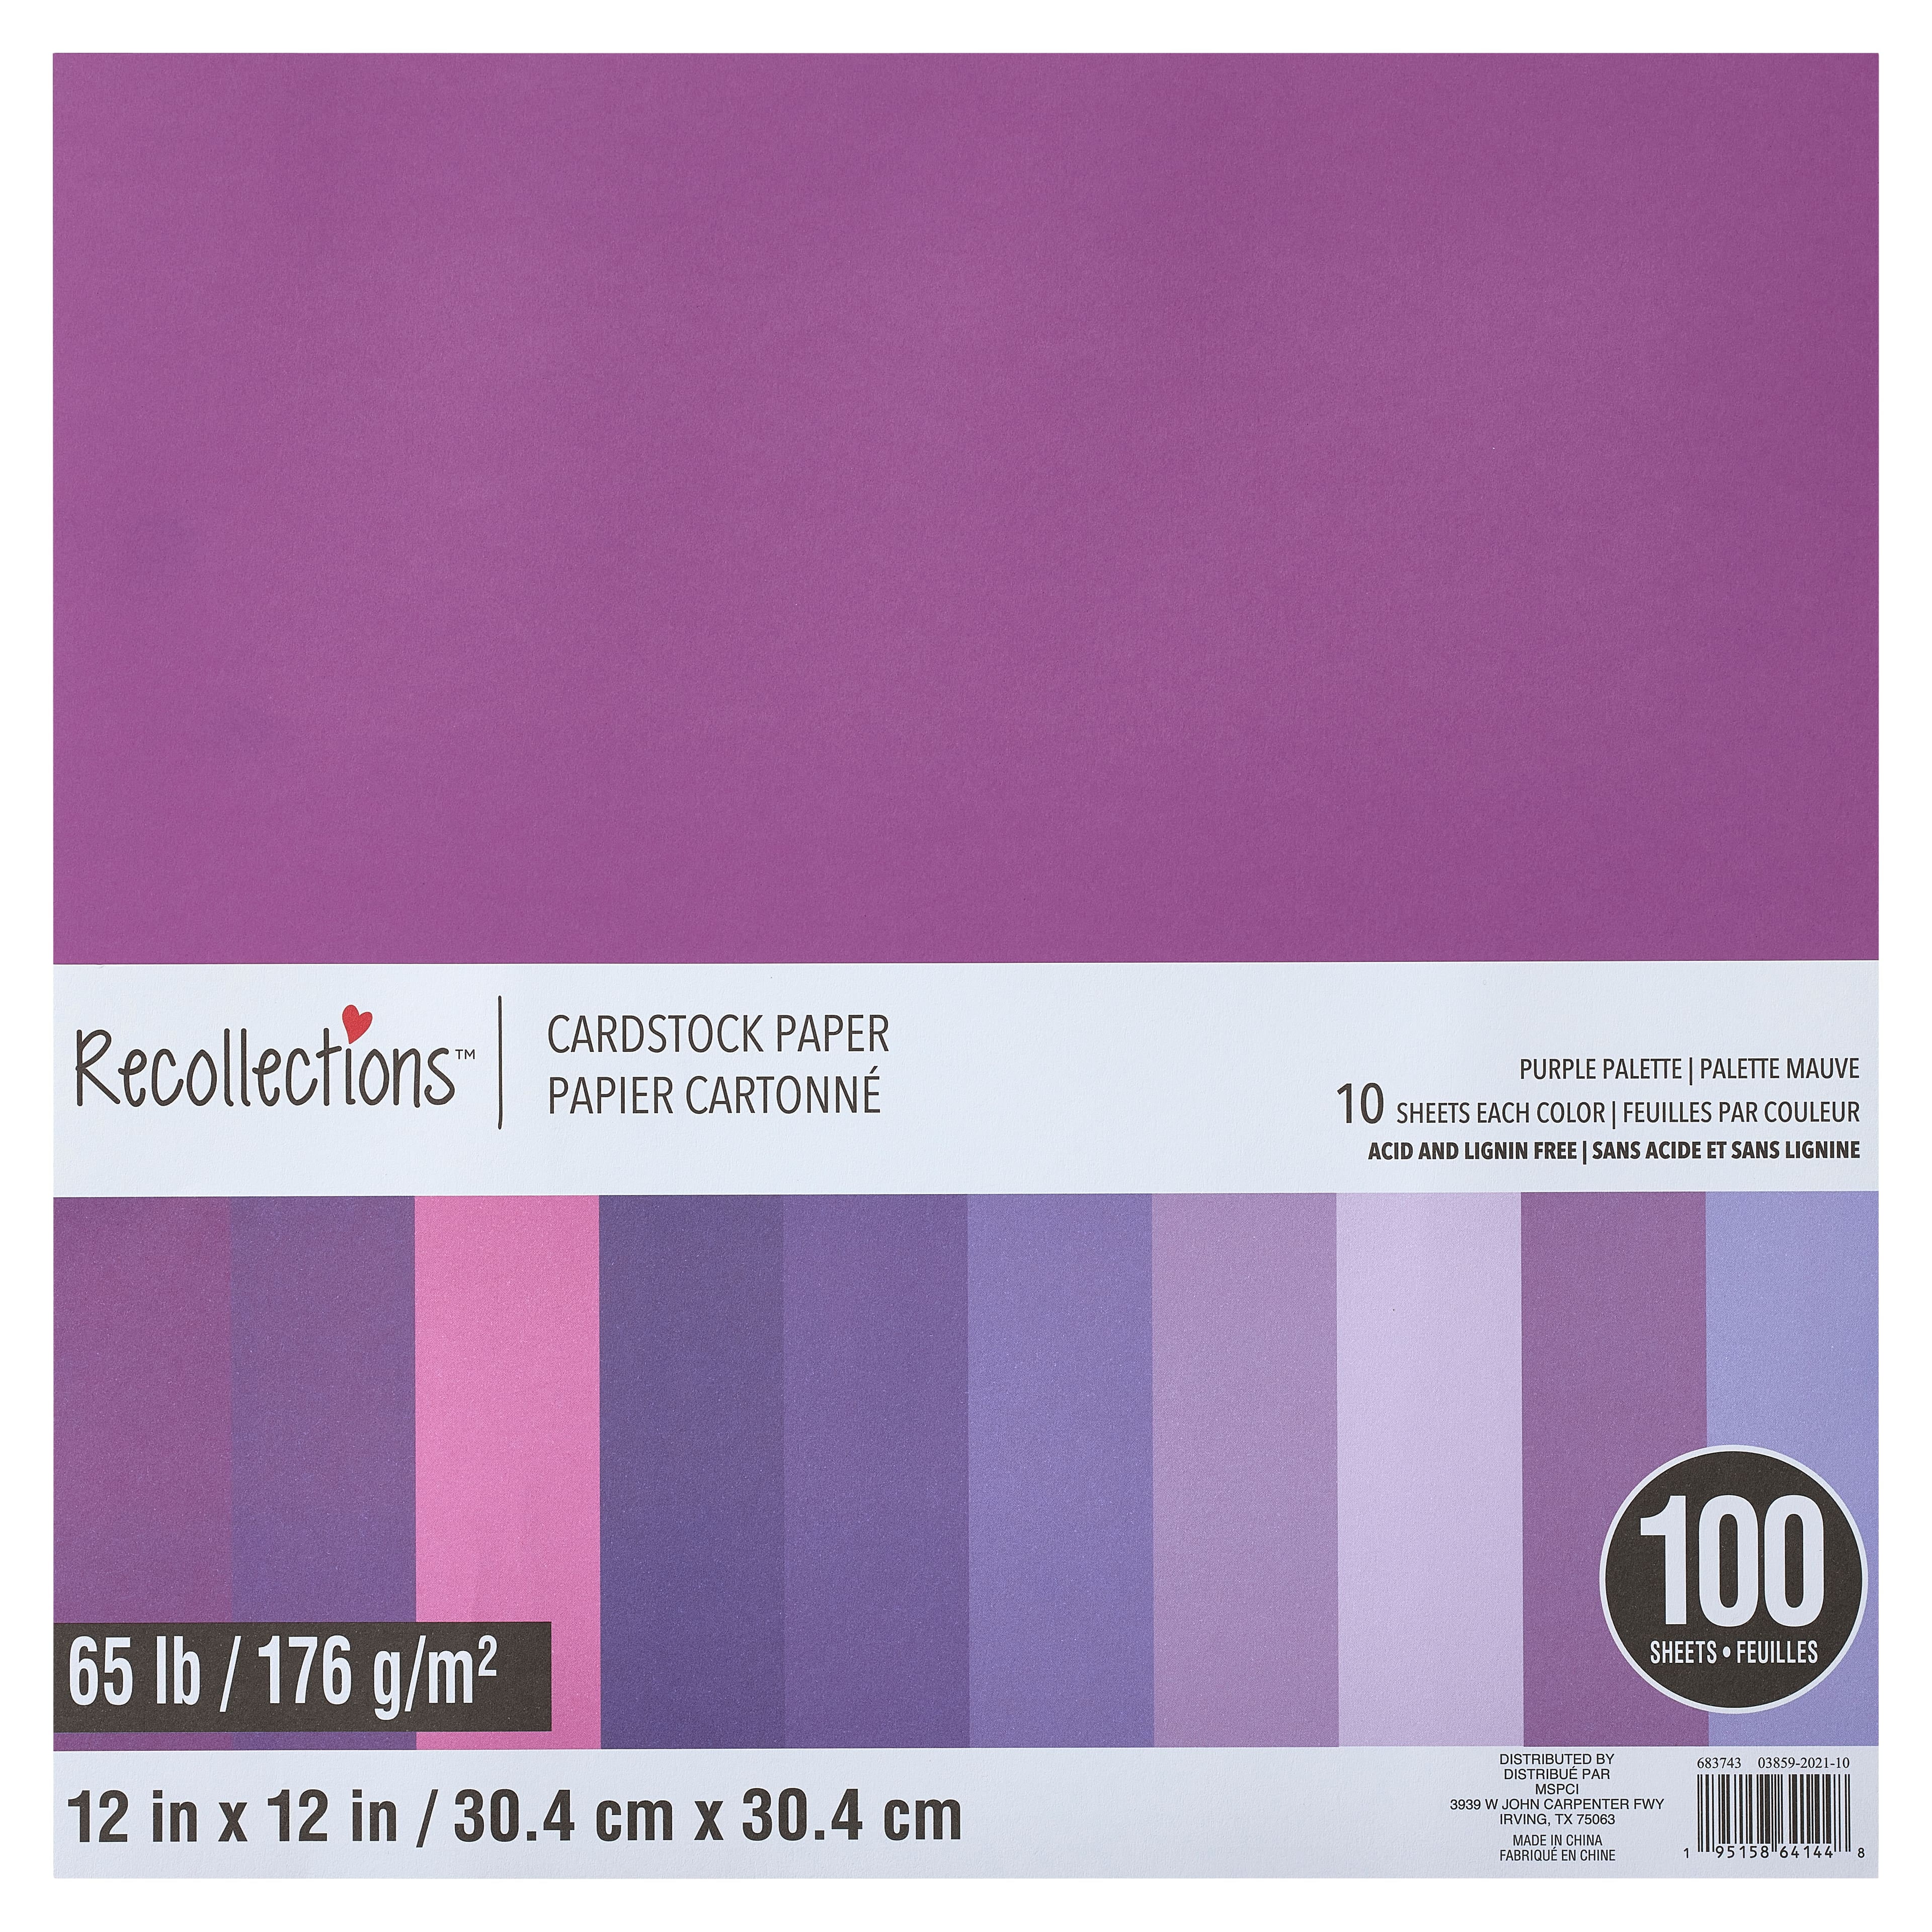 Purple Palette 12 x 12 Cardstock Paper by Recollections™, 100